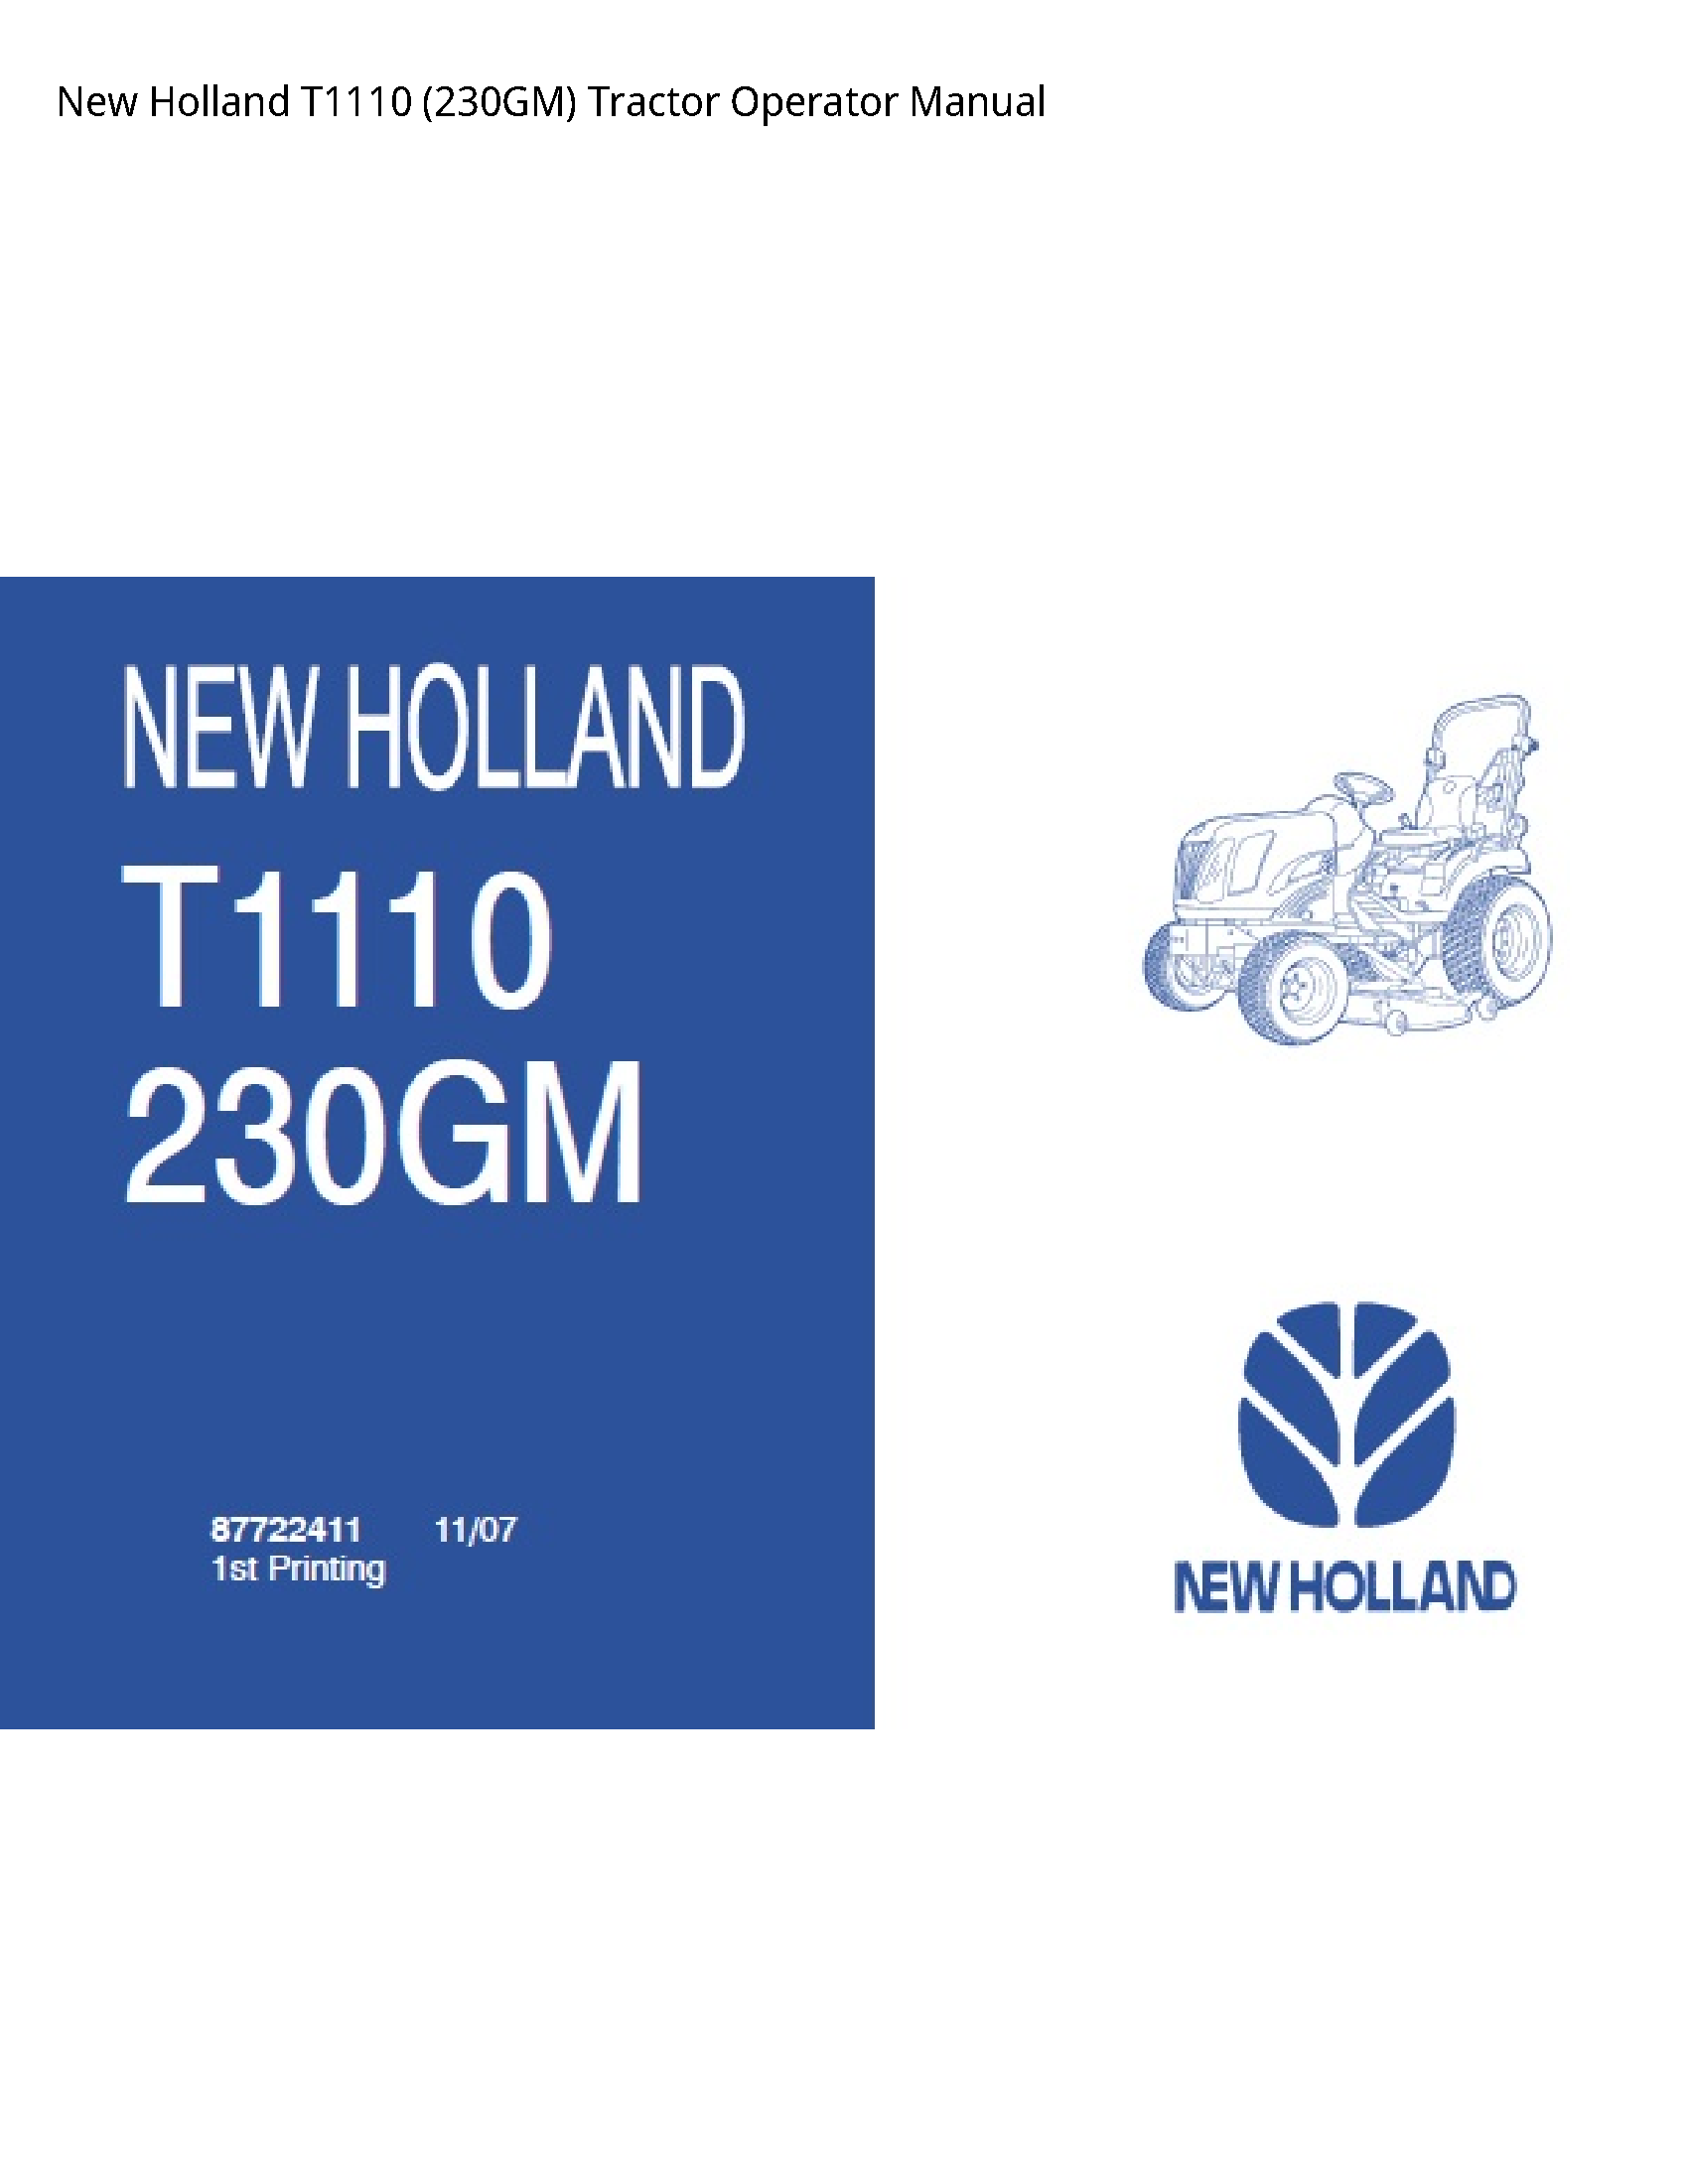 New Holland T1110 Tractor Operator manual